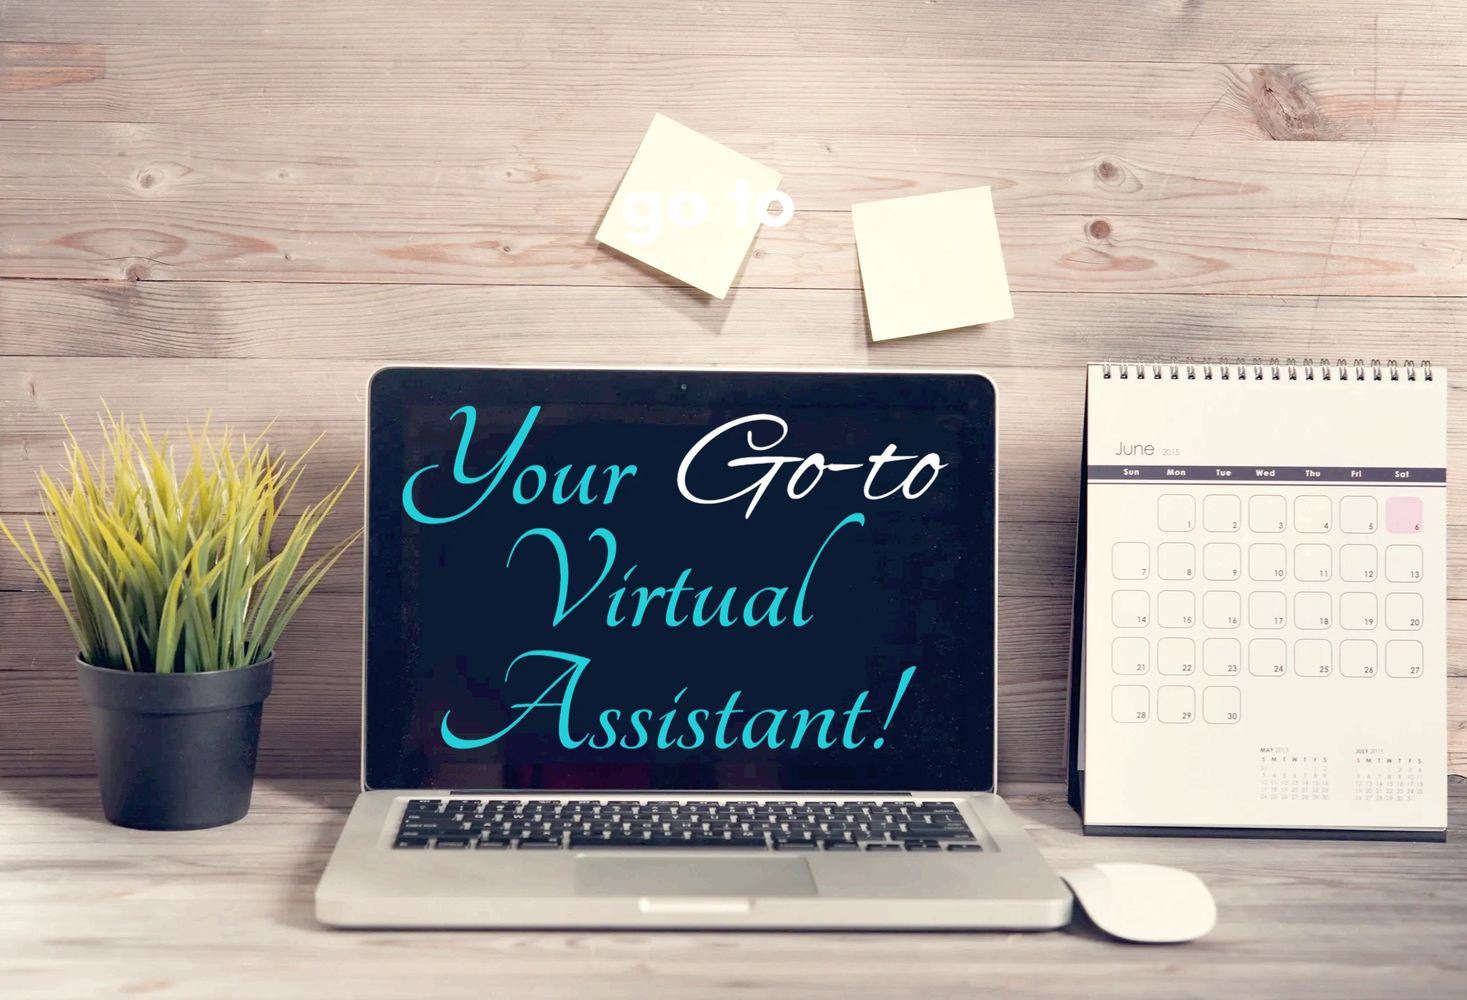 Your Go-To Virtual Assistant!